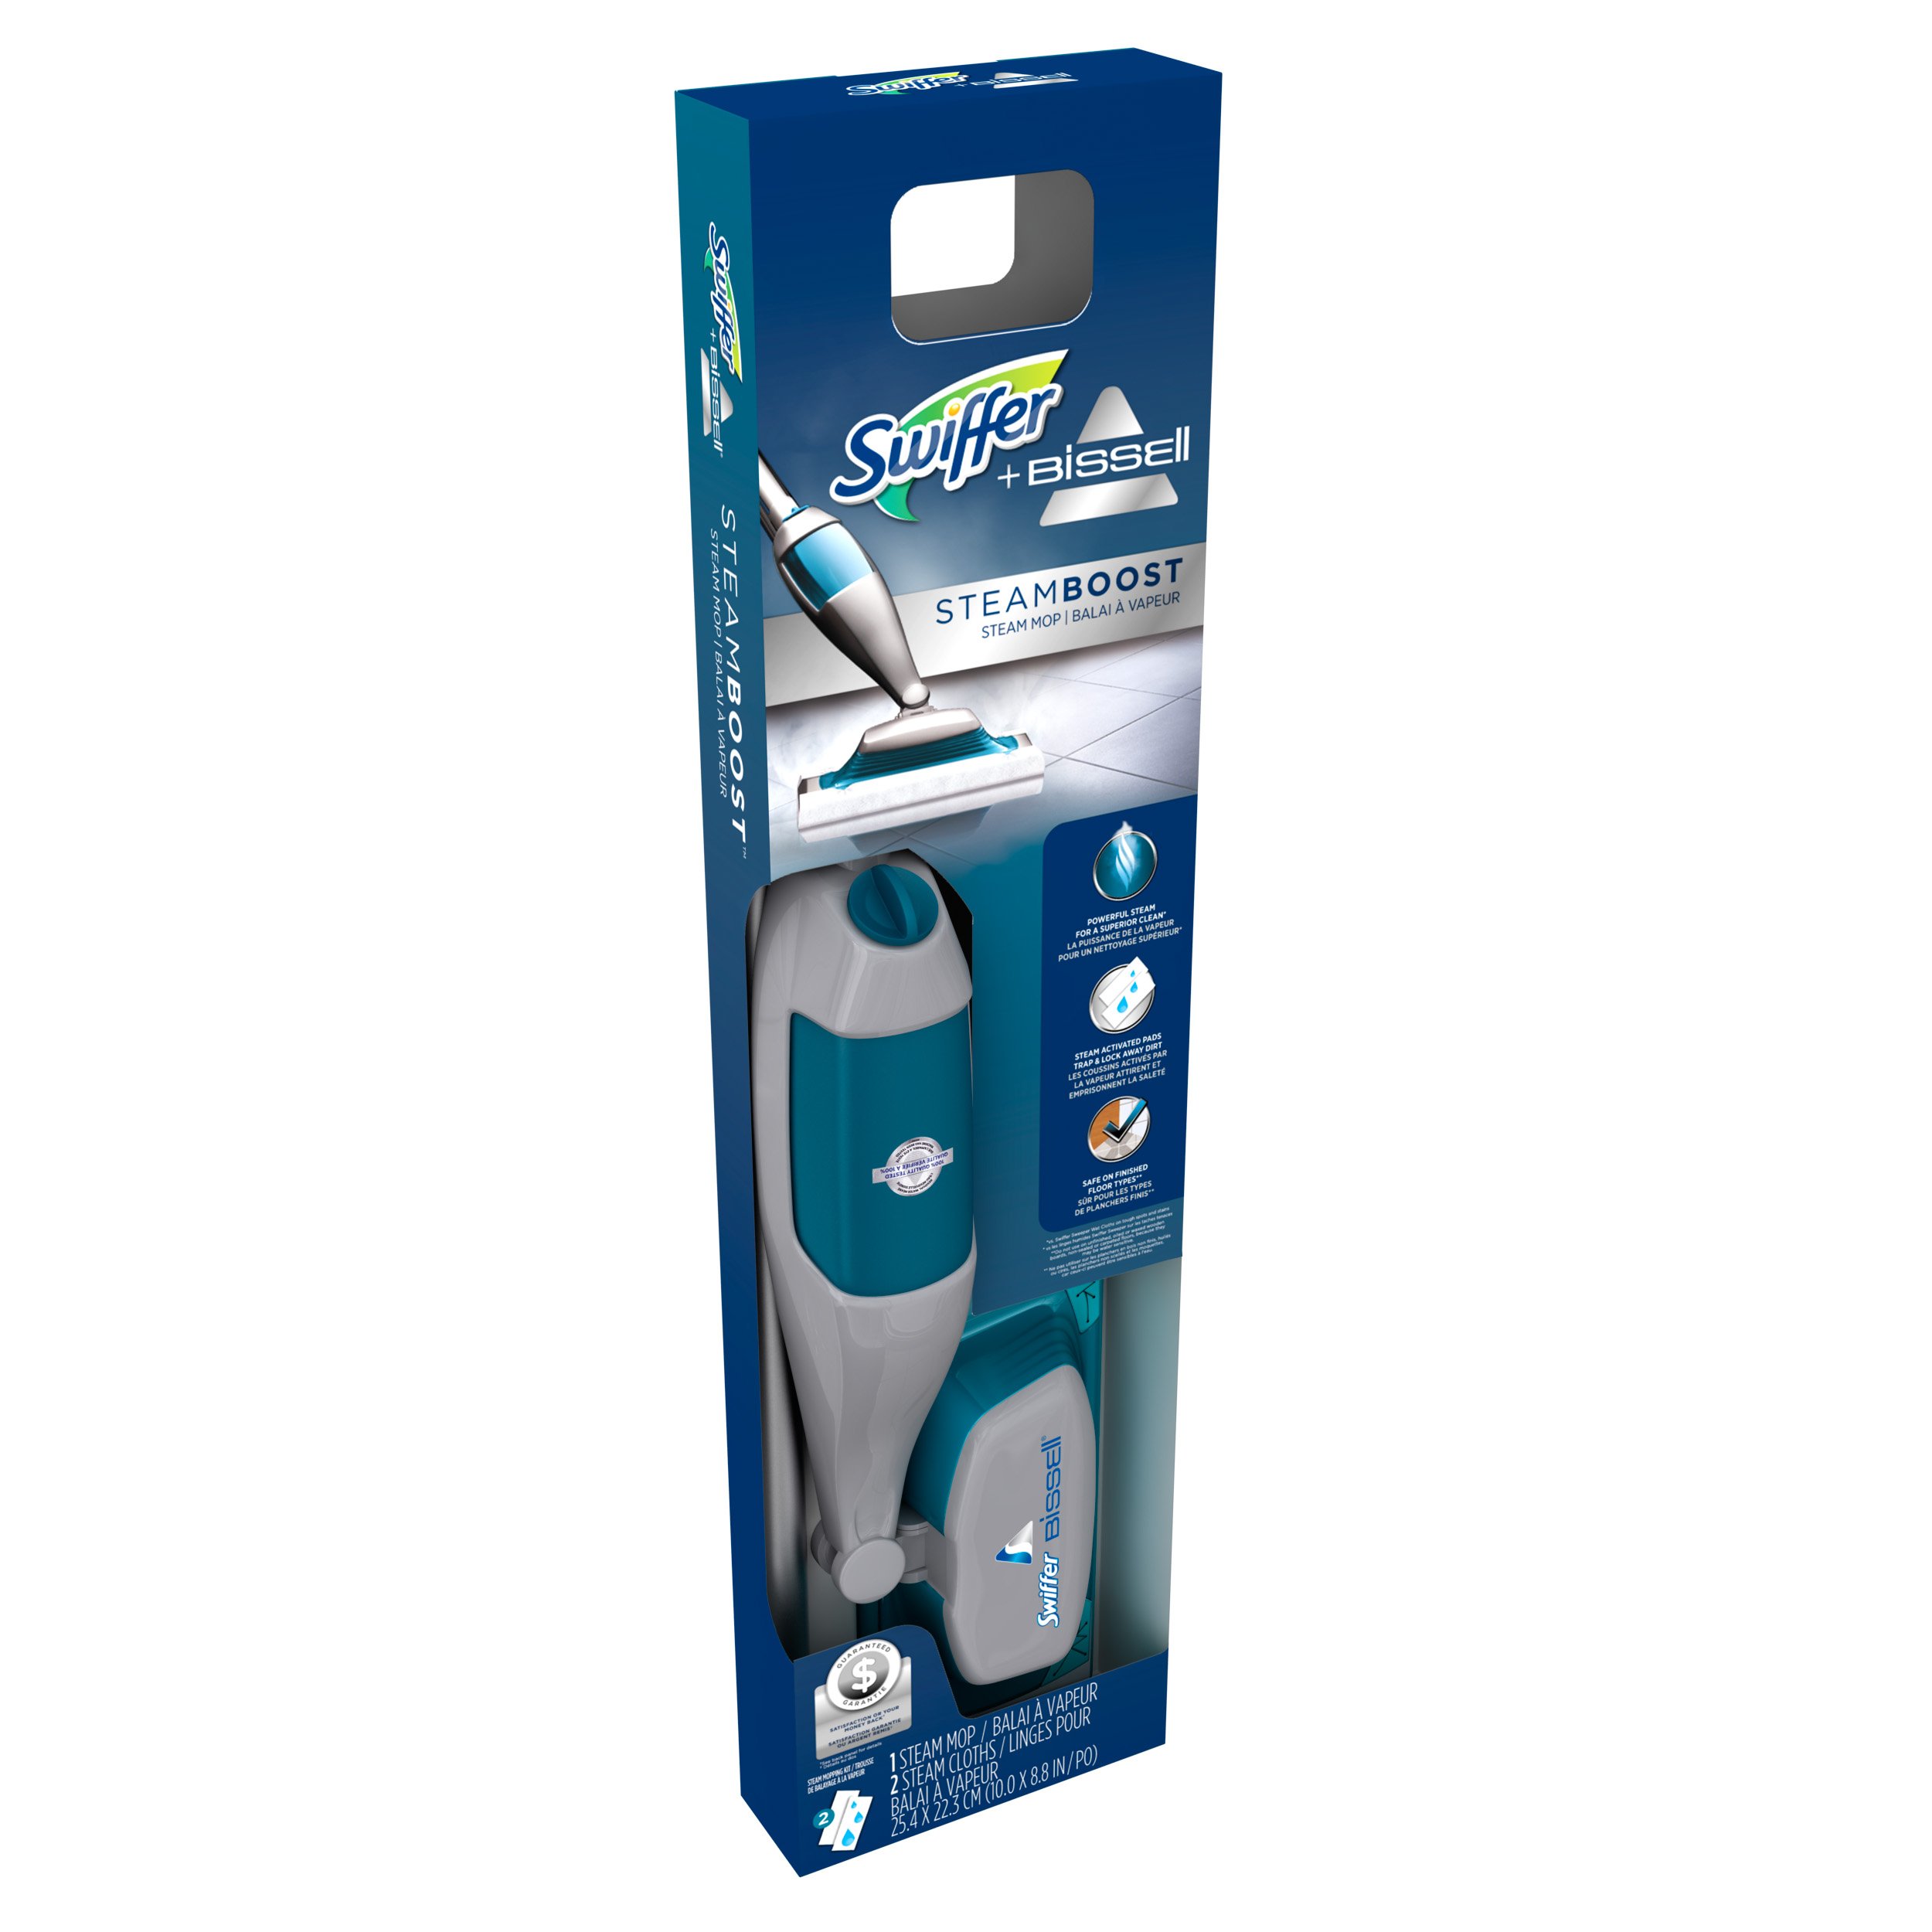 Swiffer Steamboost Powered By Bissell Steam Mop Starter Kit Shop Mops 